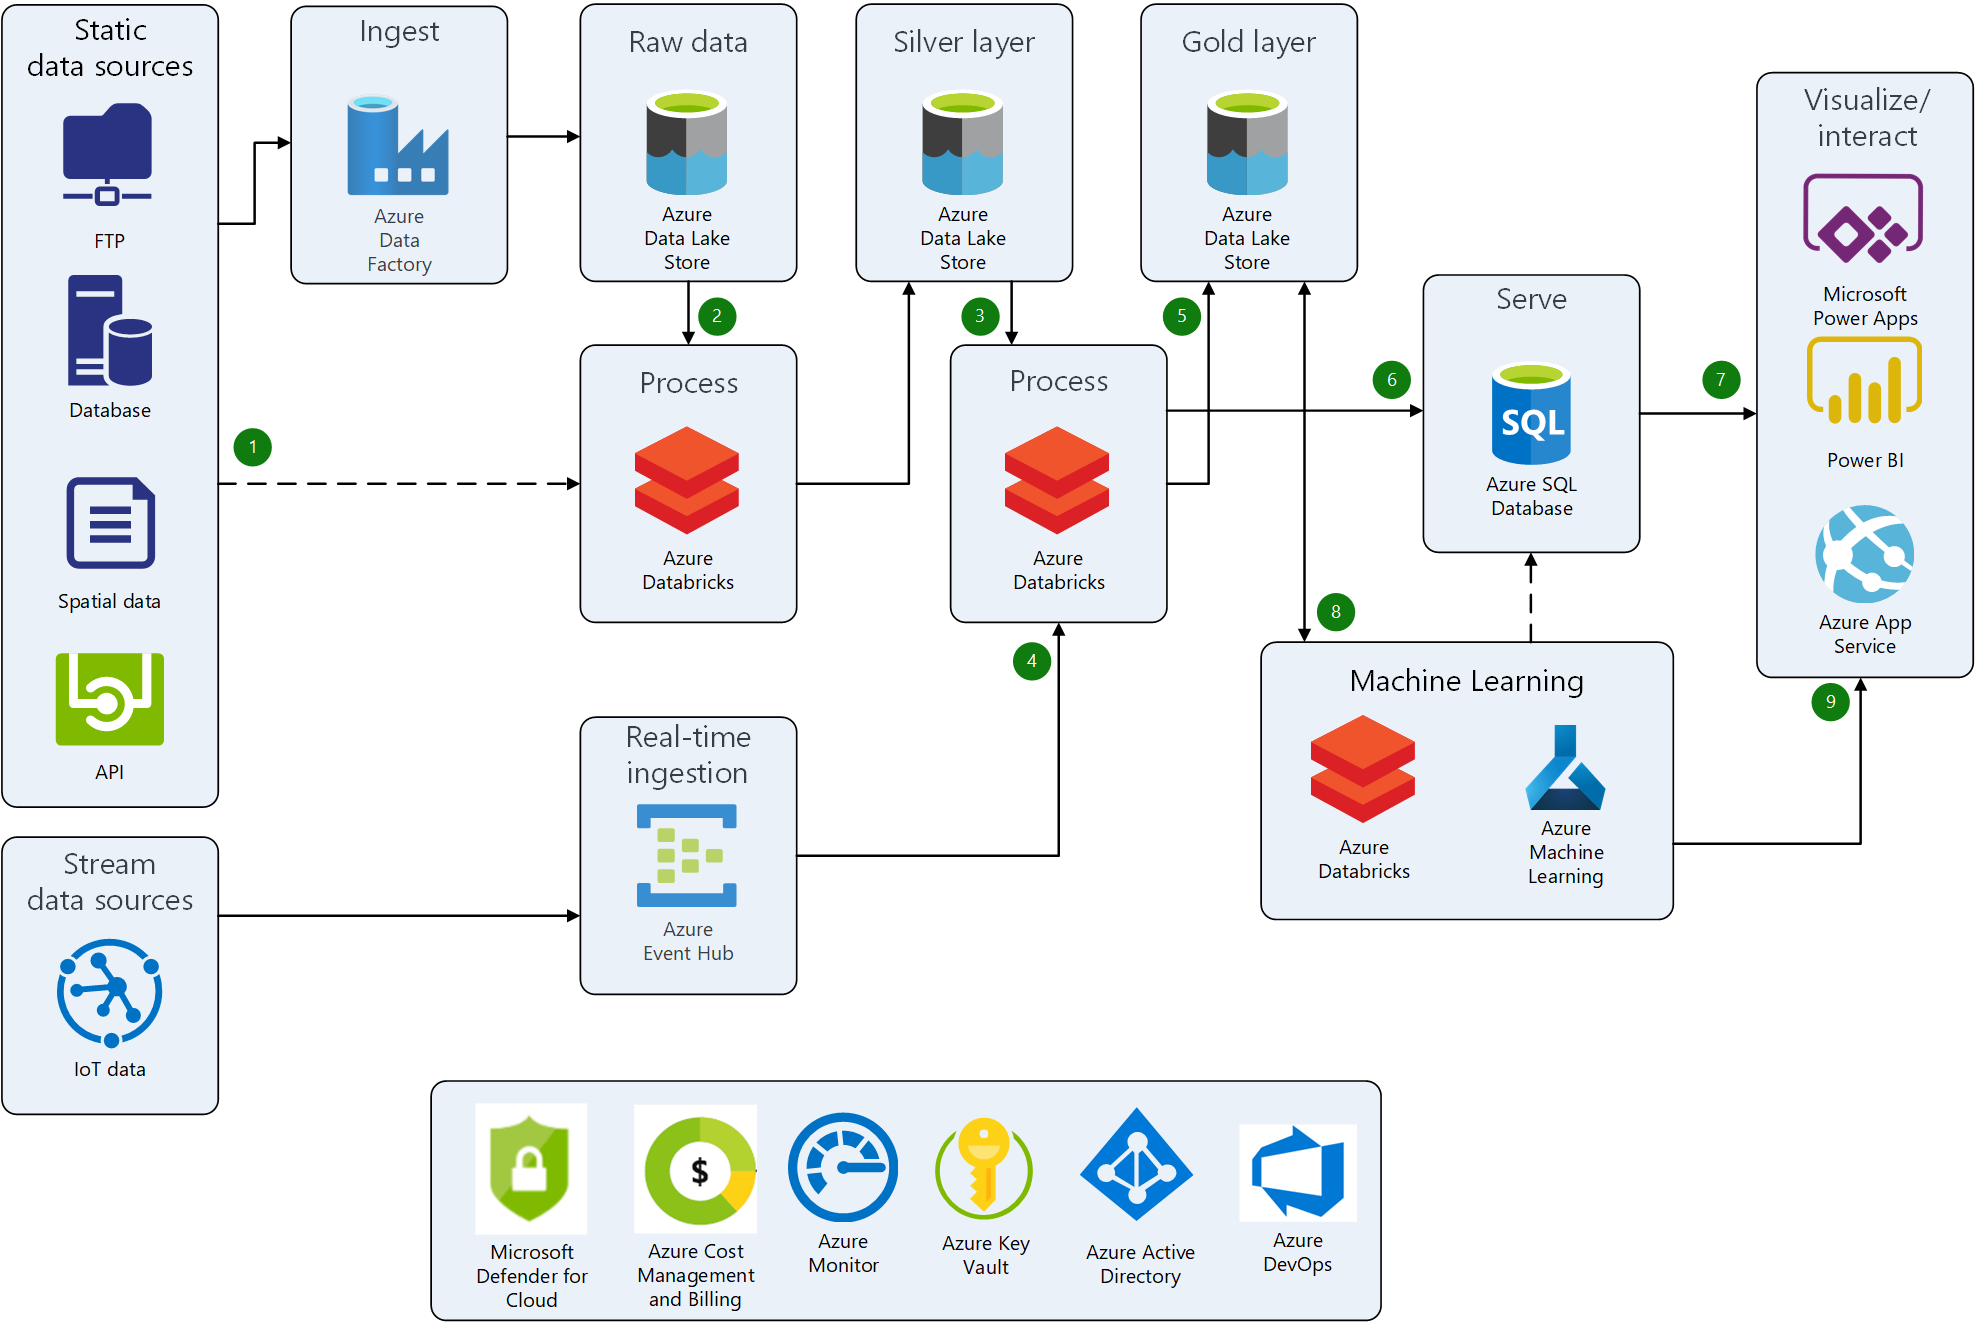 Diagram that shows an example workload Azure architecture for sports analytics.